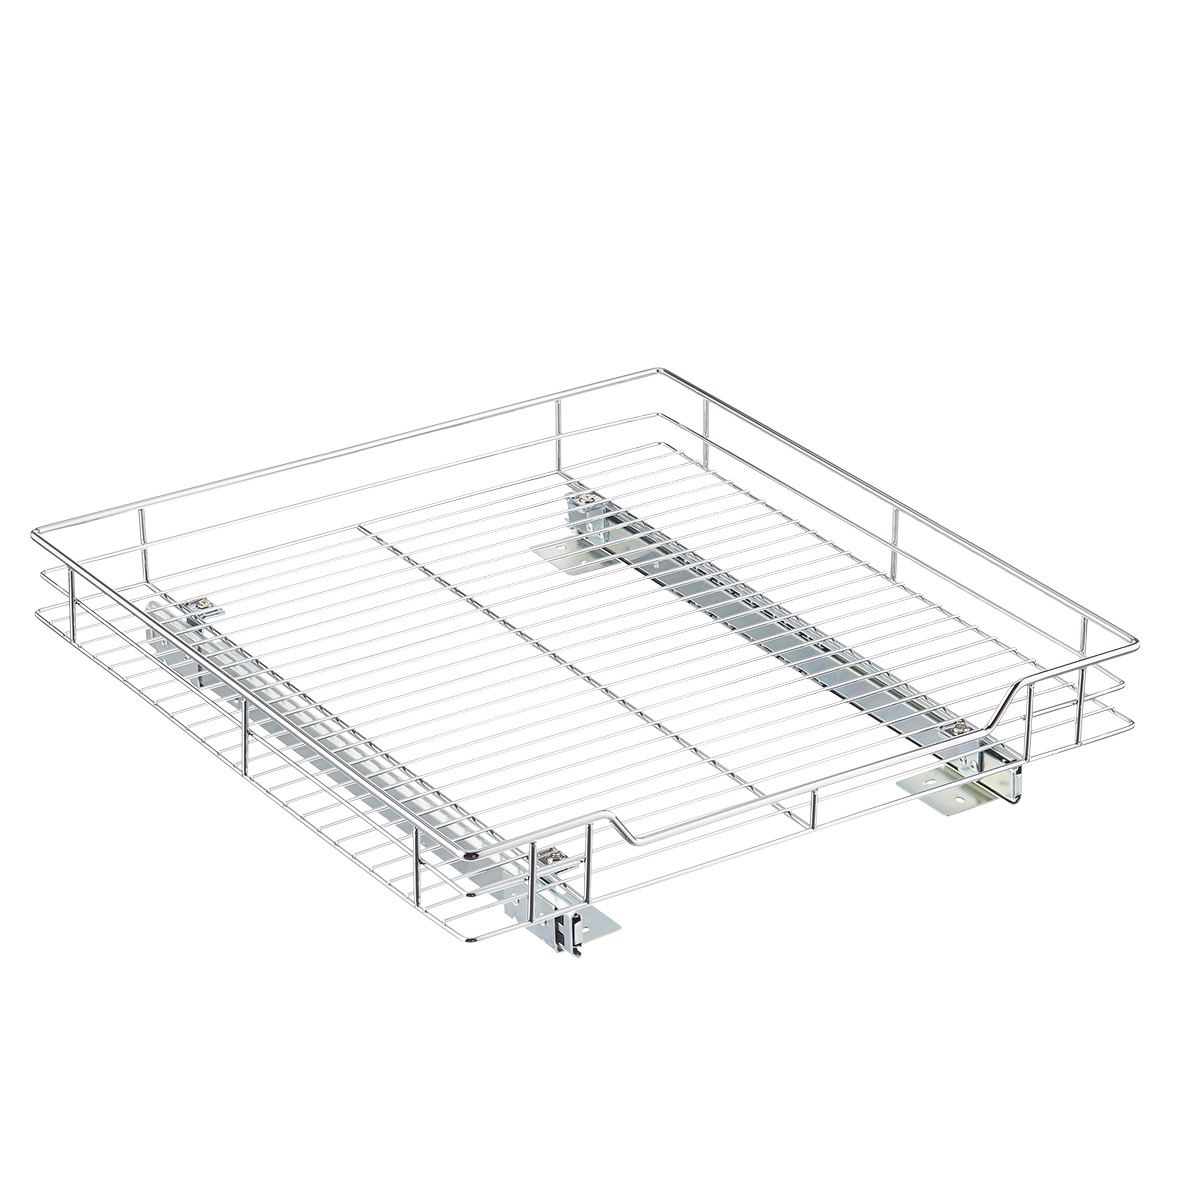 https://www.containerstore.com/catalogimages/402956/10083743-roll-out-cabinet-drawer-20'.jpg